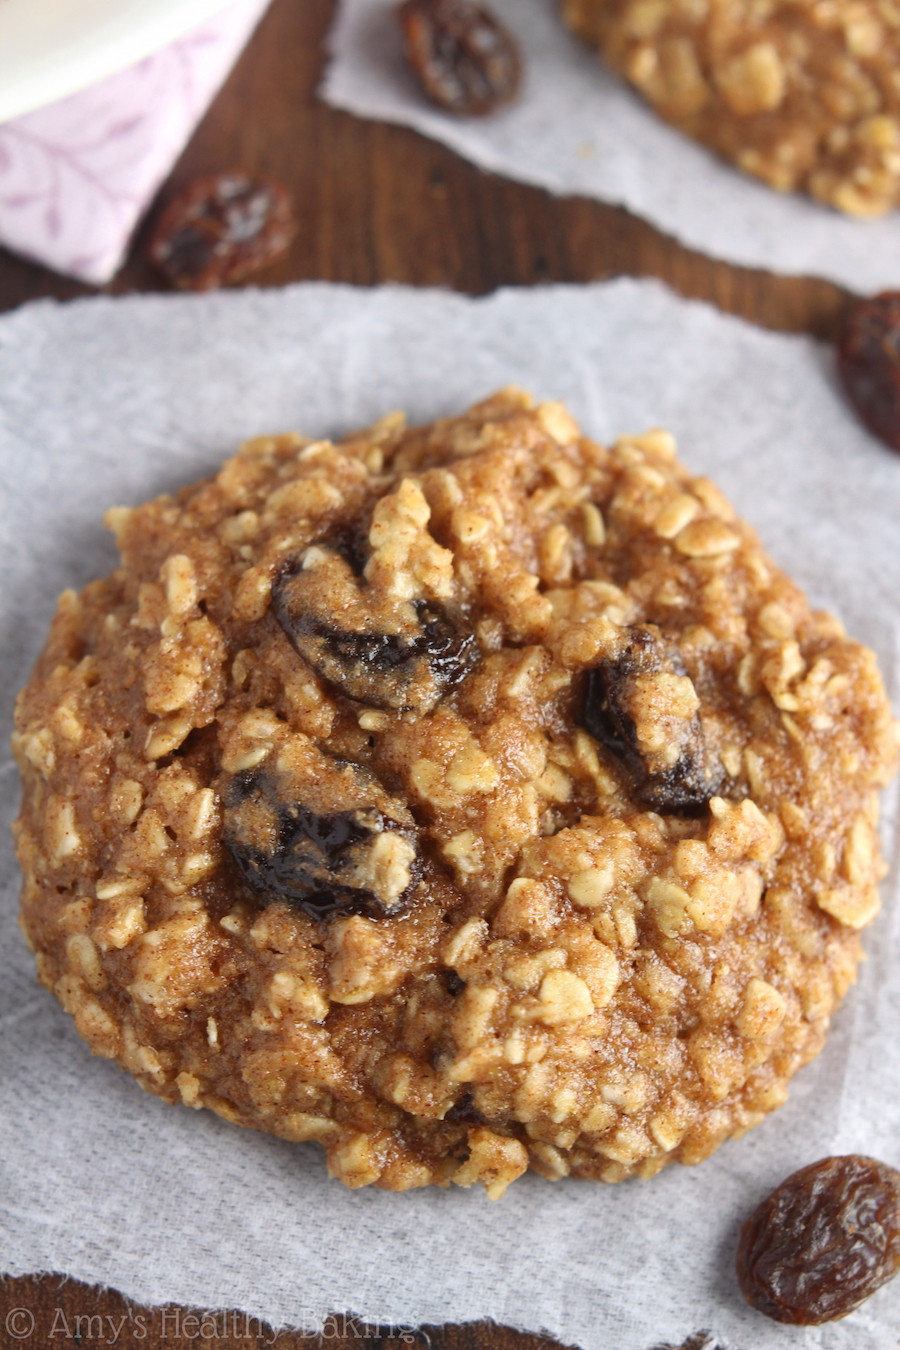 Healthy Homemade Oatmeal Cookies
 The Ultimate Healthy Soft & Chewy Oatmeal Raisin Cookies